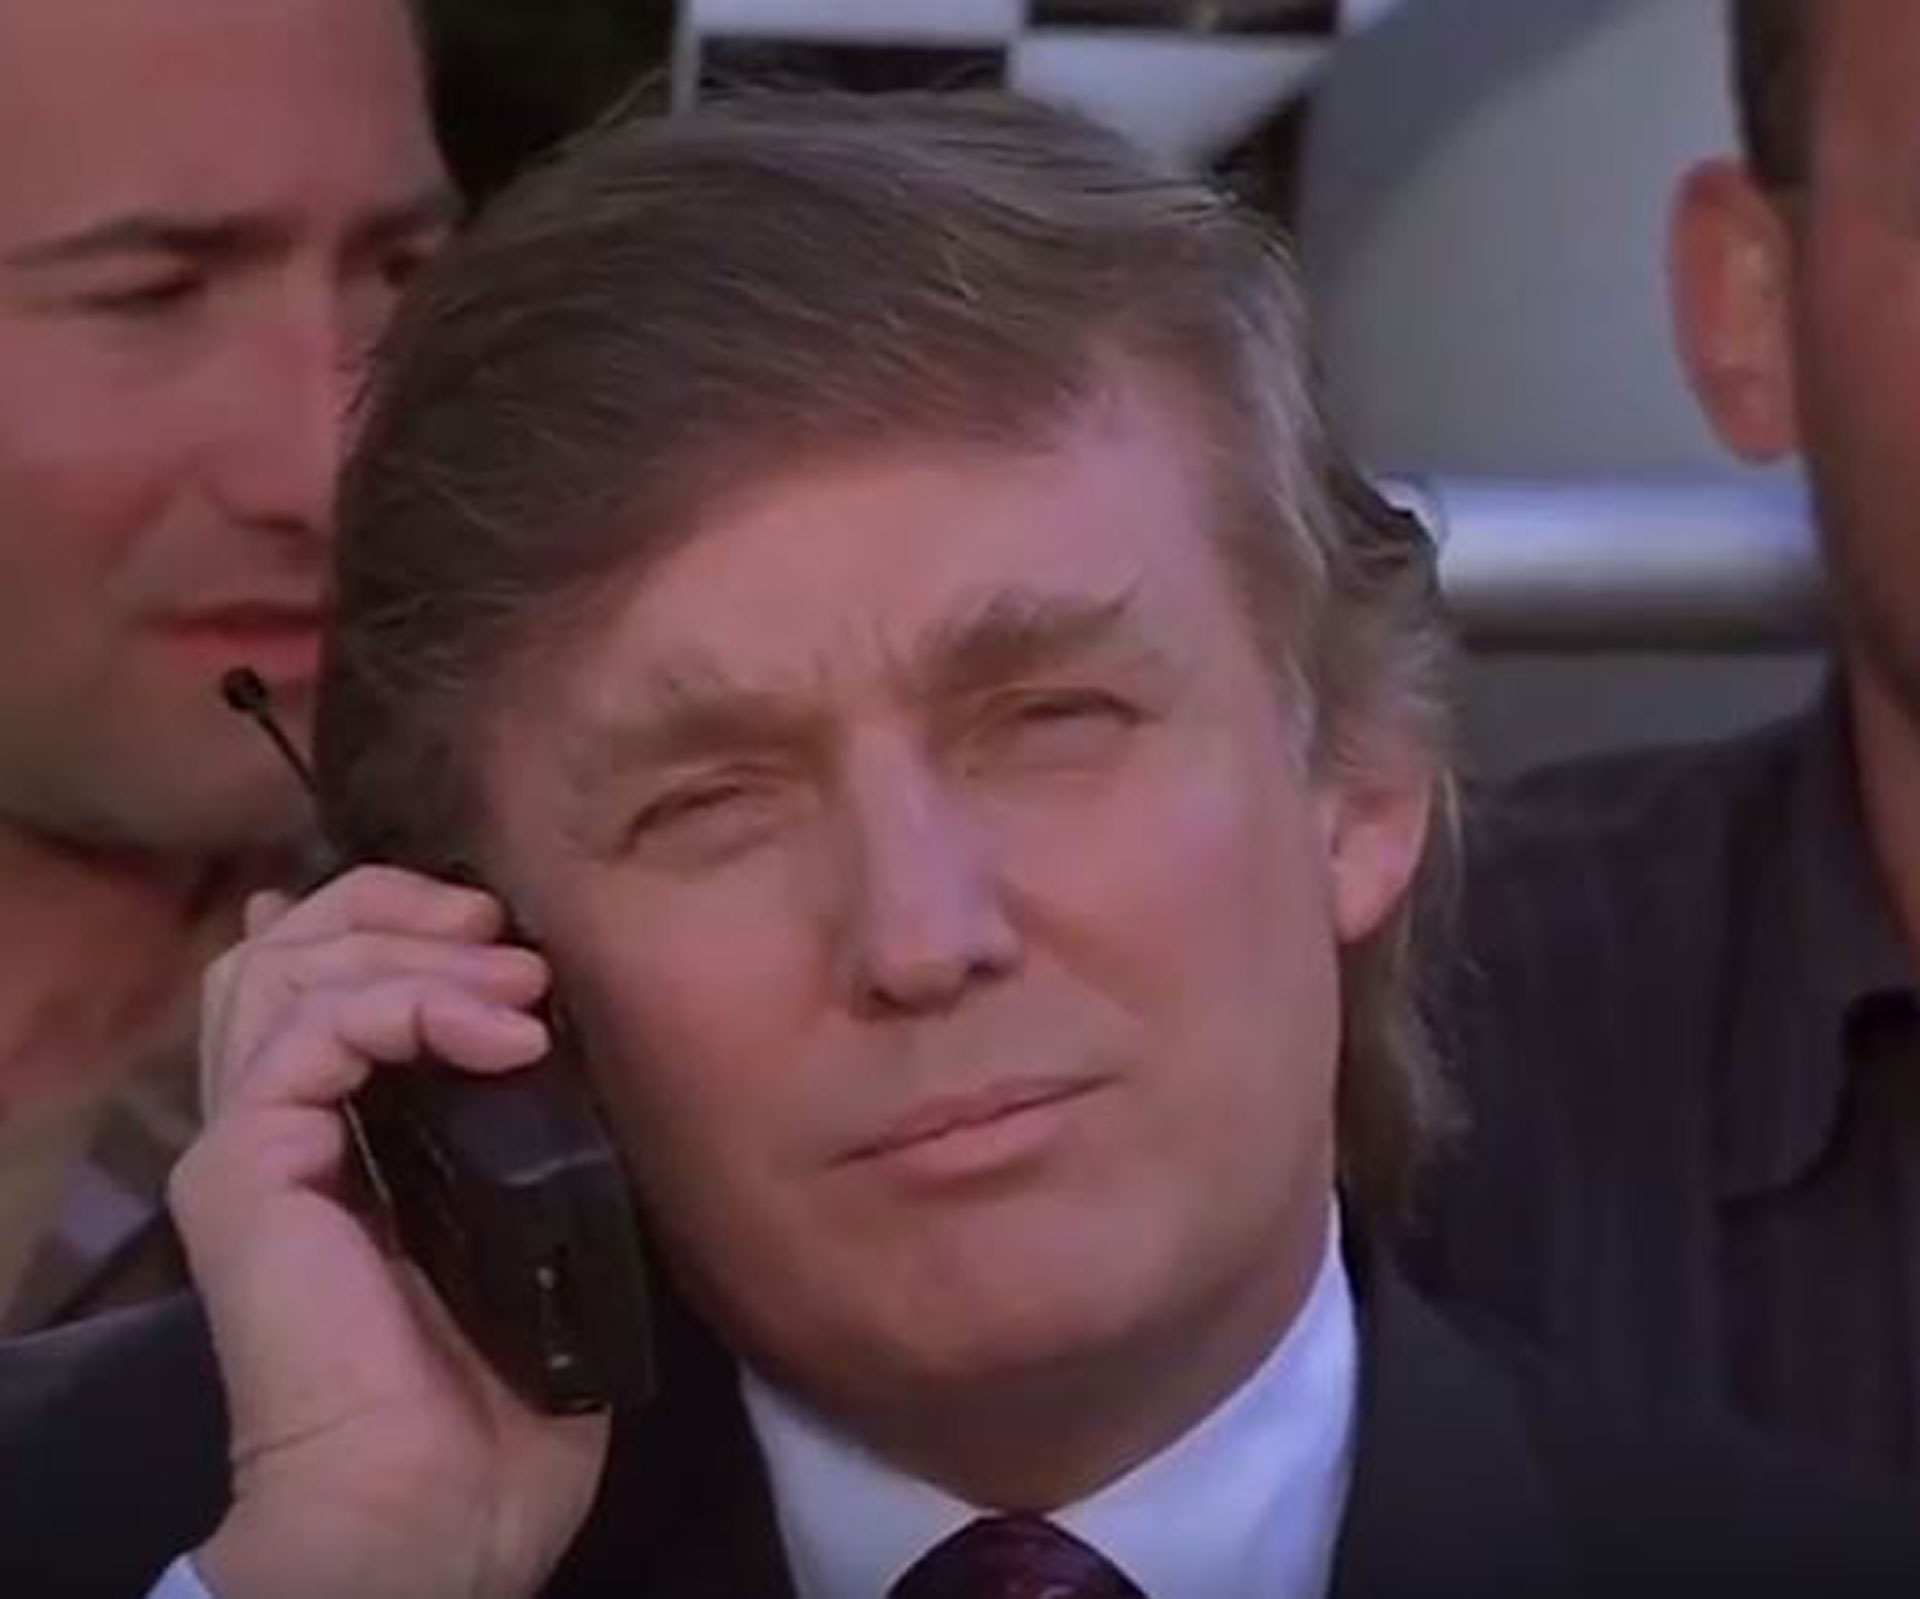 WATCH: Highlights from Donald Trump’s acting career